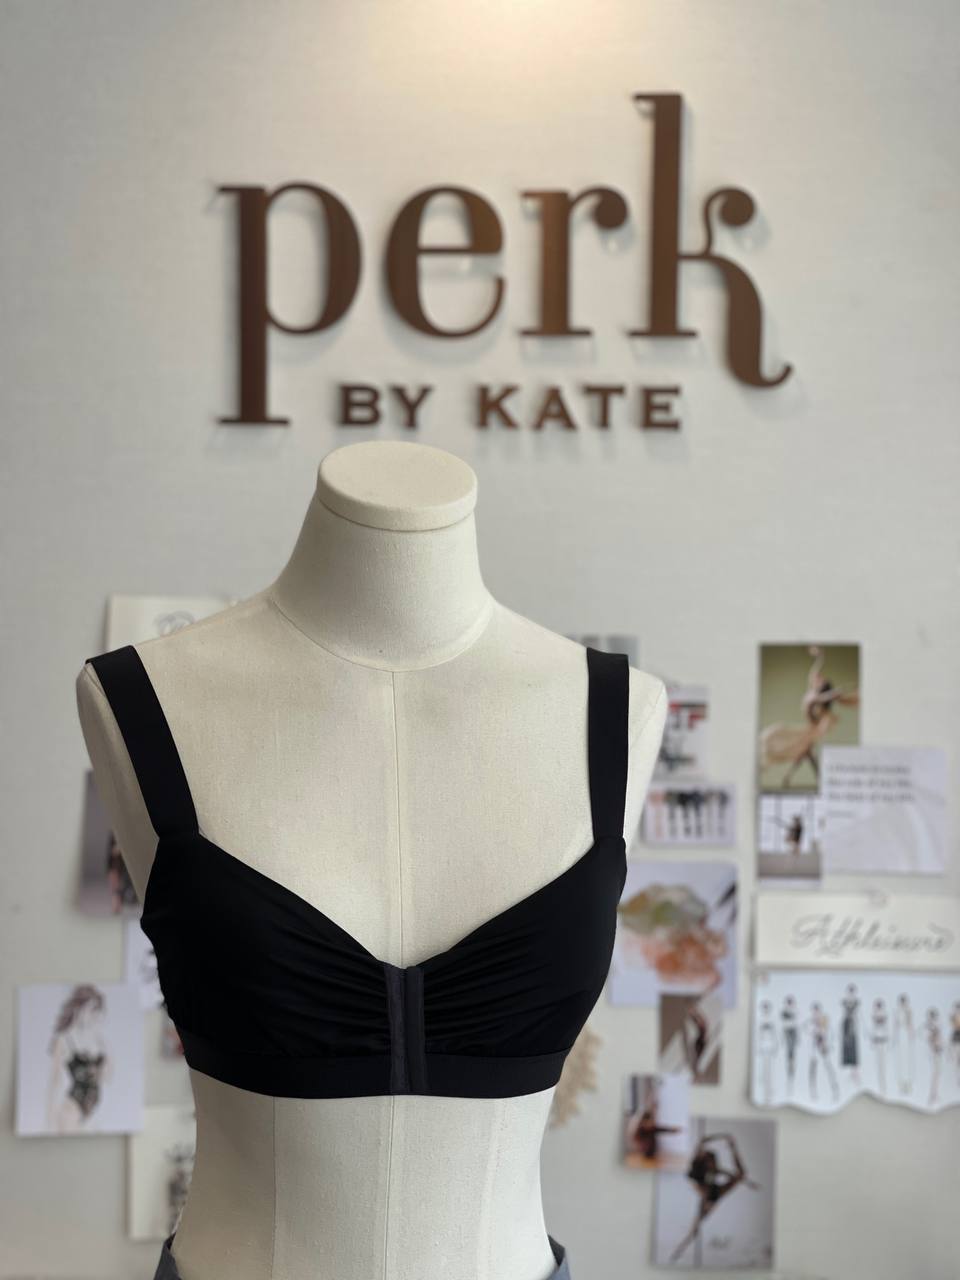 This Singapore lingerie maker designs stylish bras for breast